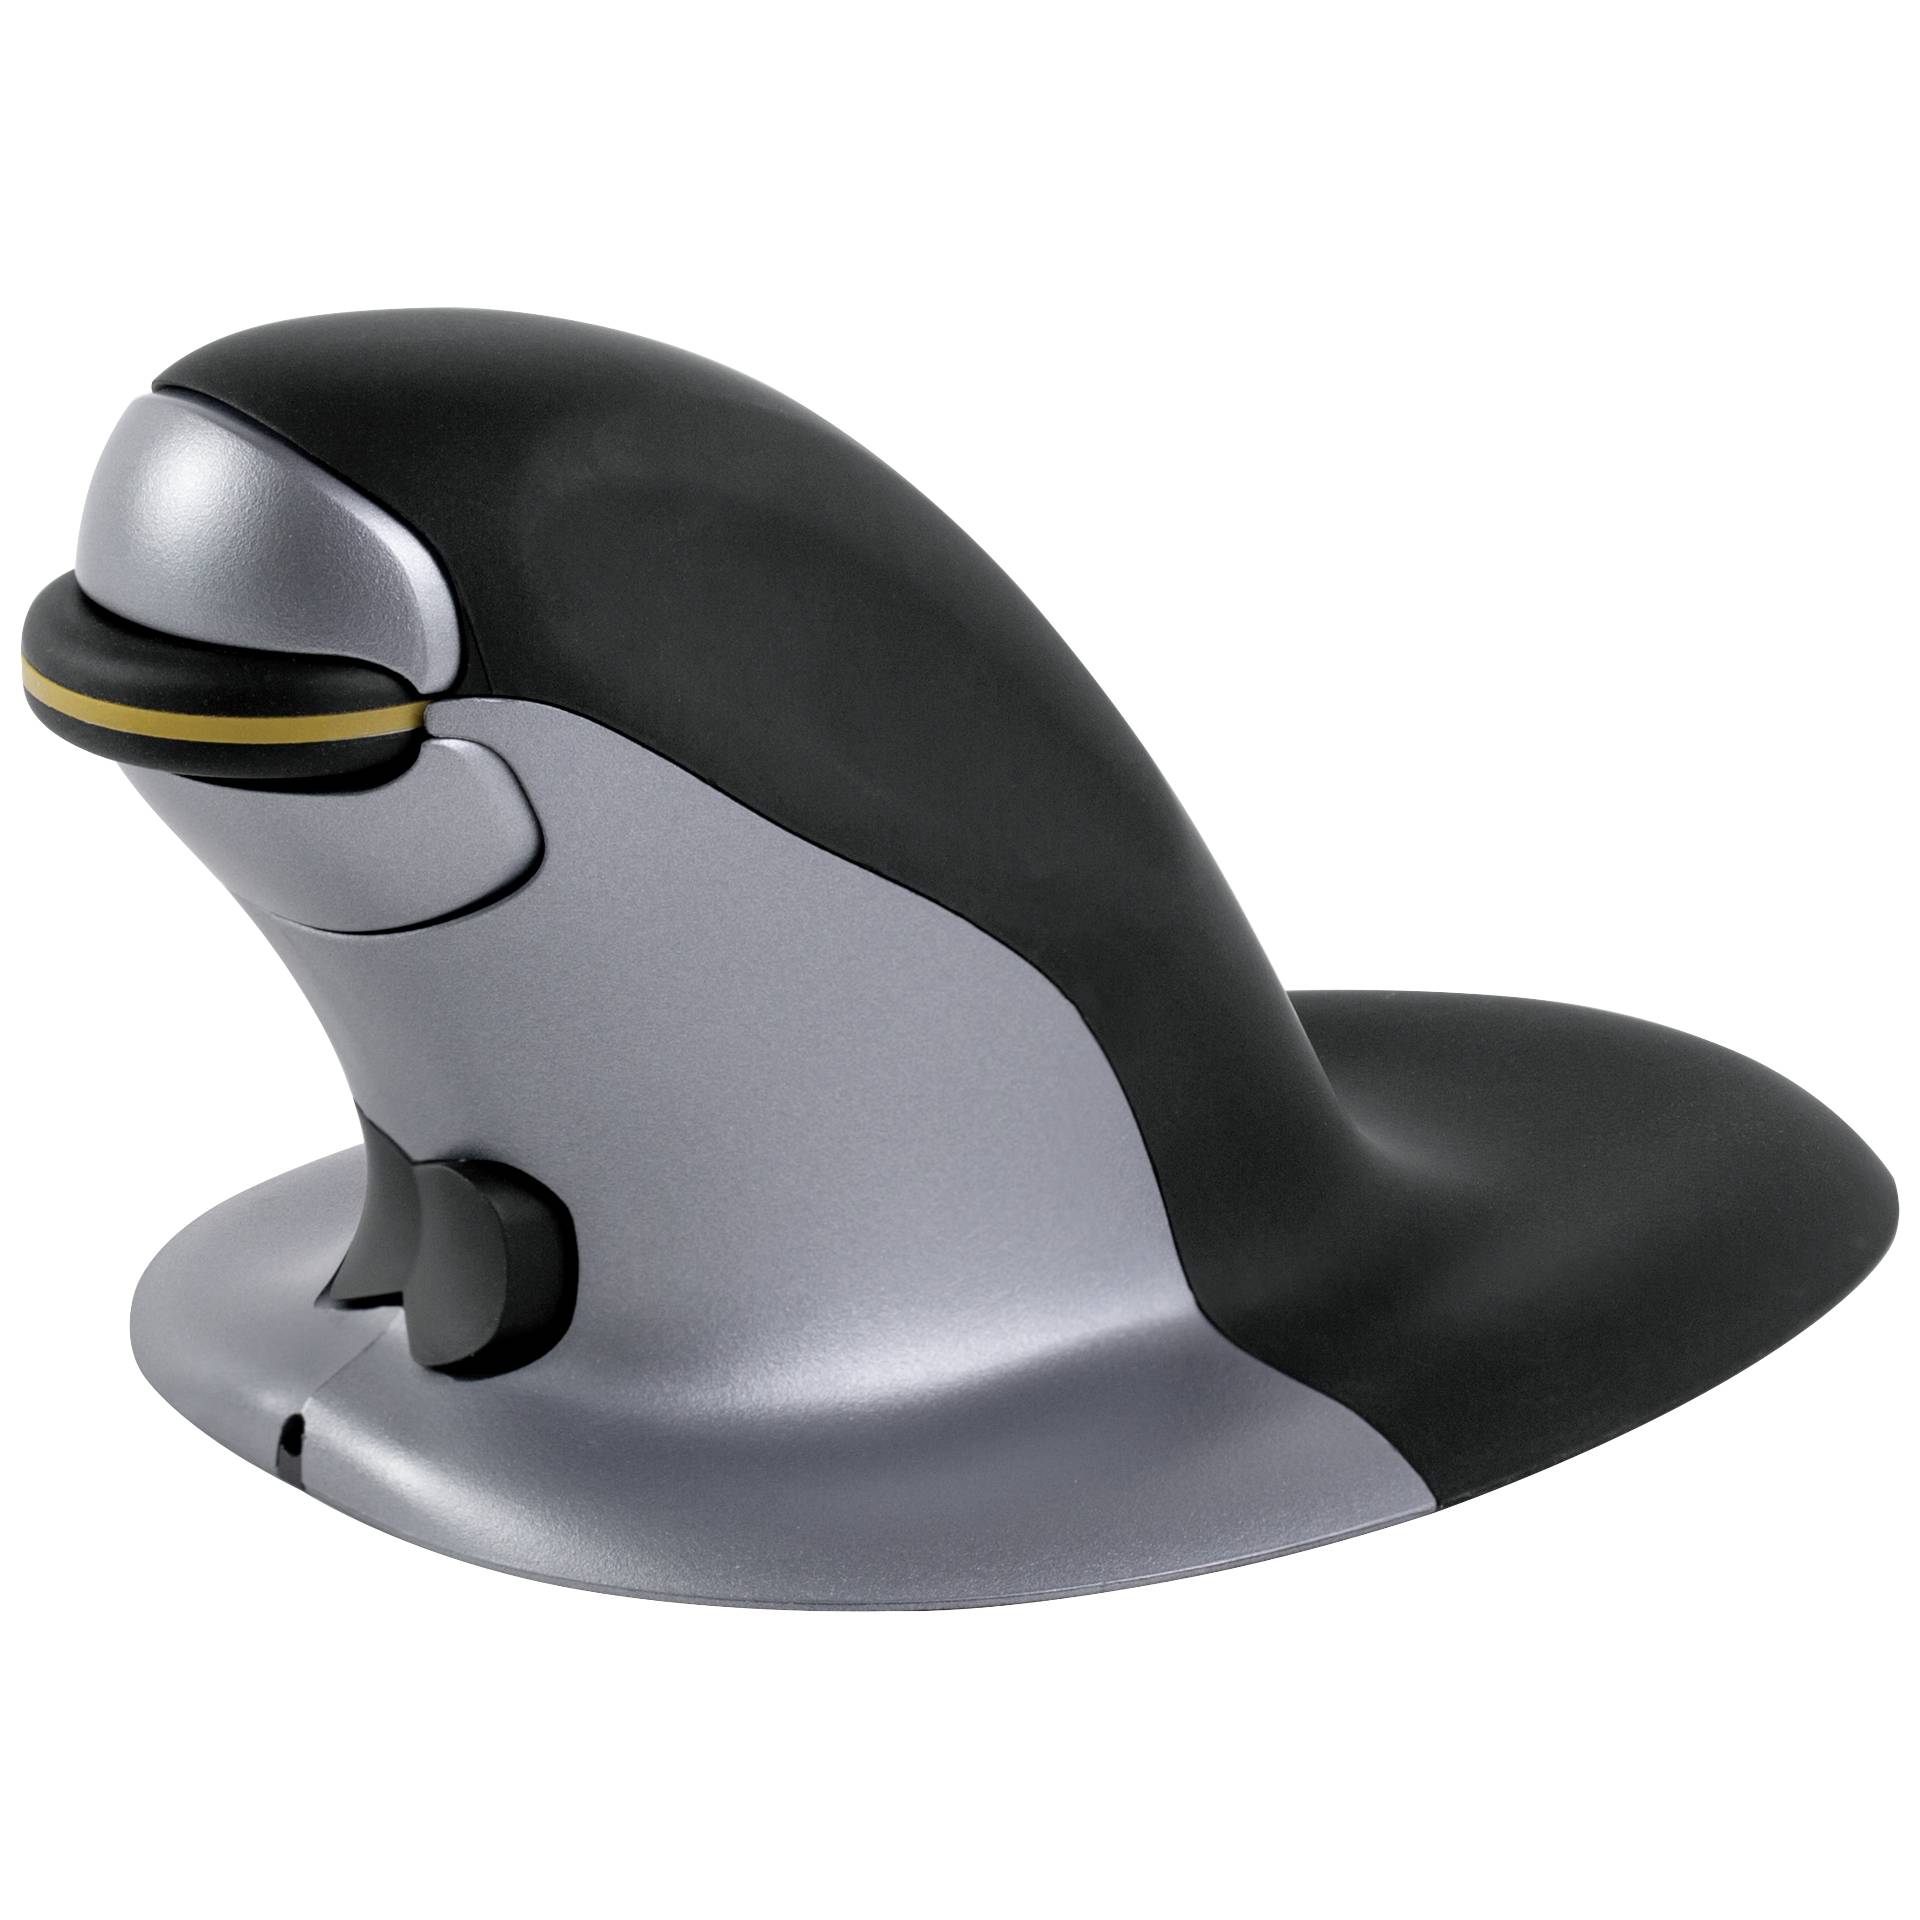 Fellowes Penguin ambidestro mouse verticale wireless